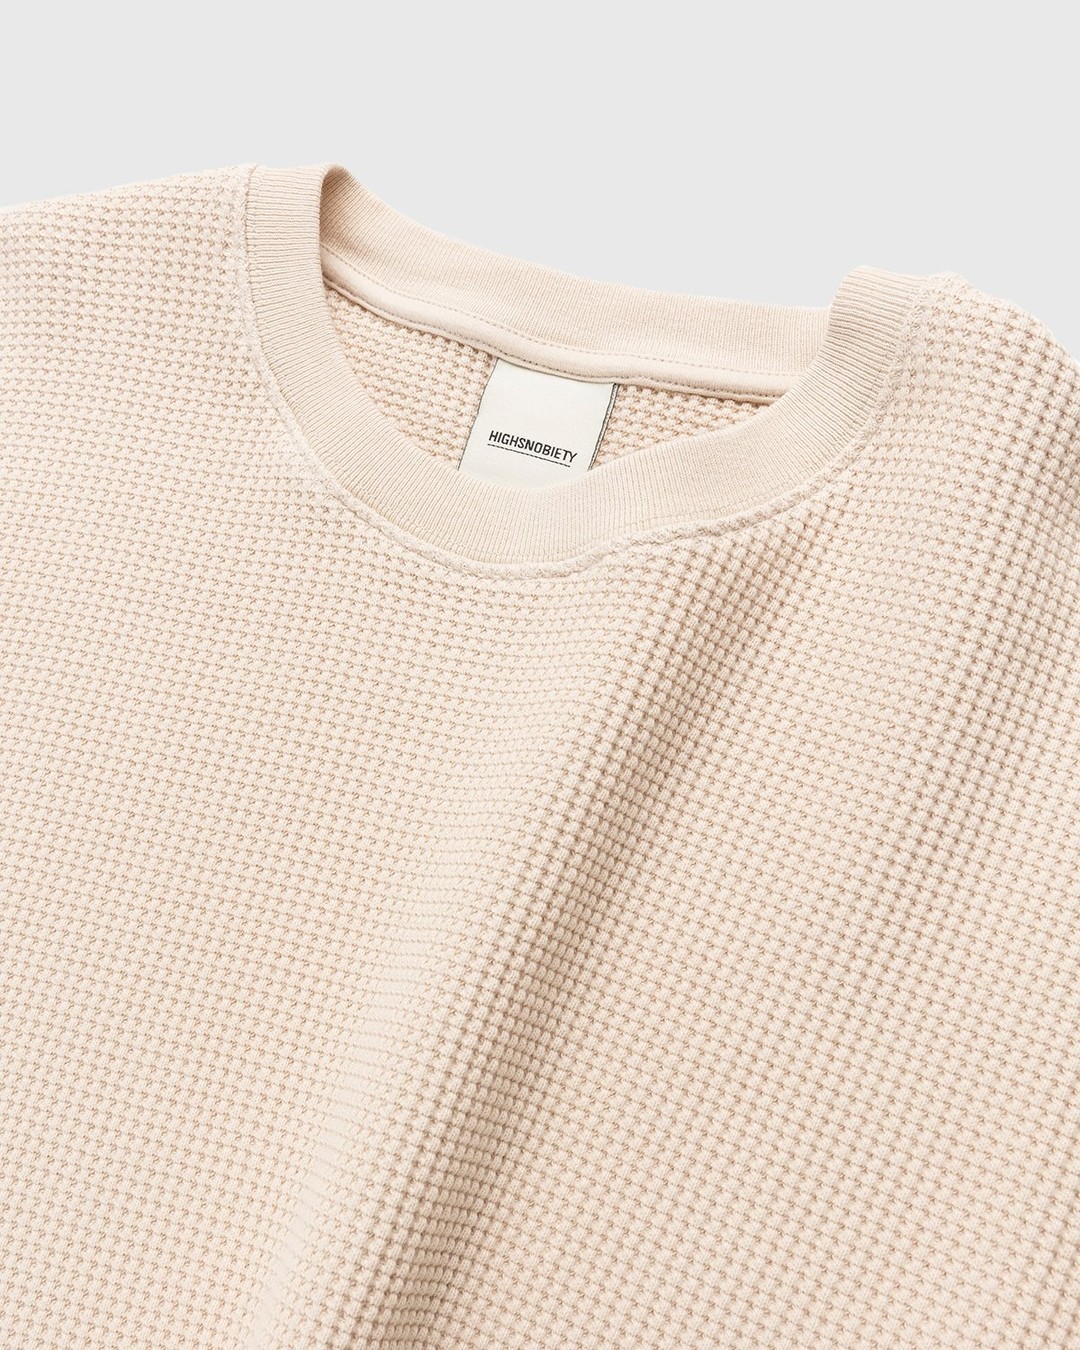 Highsnobiety – Thermal Staples Long Sleeve Off White - Sweats - Beige - Image 4